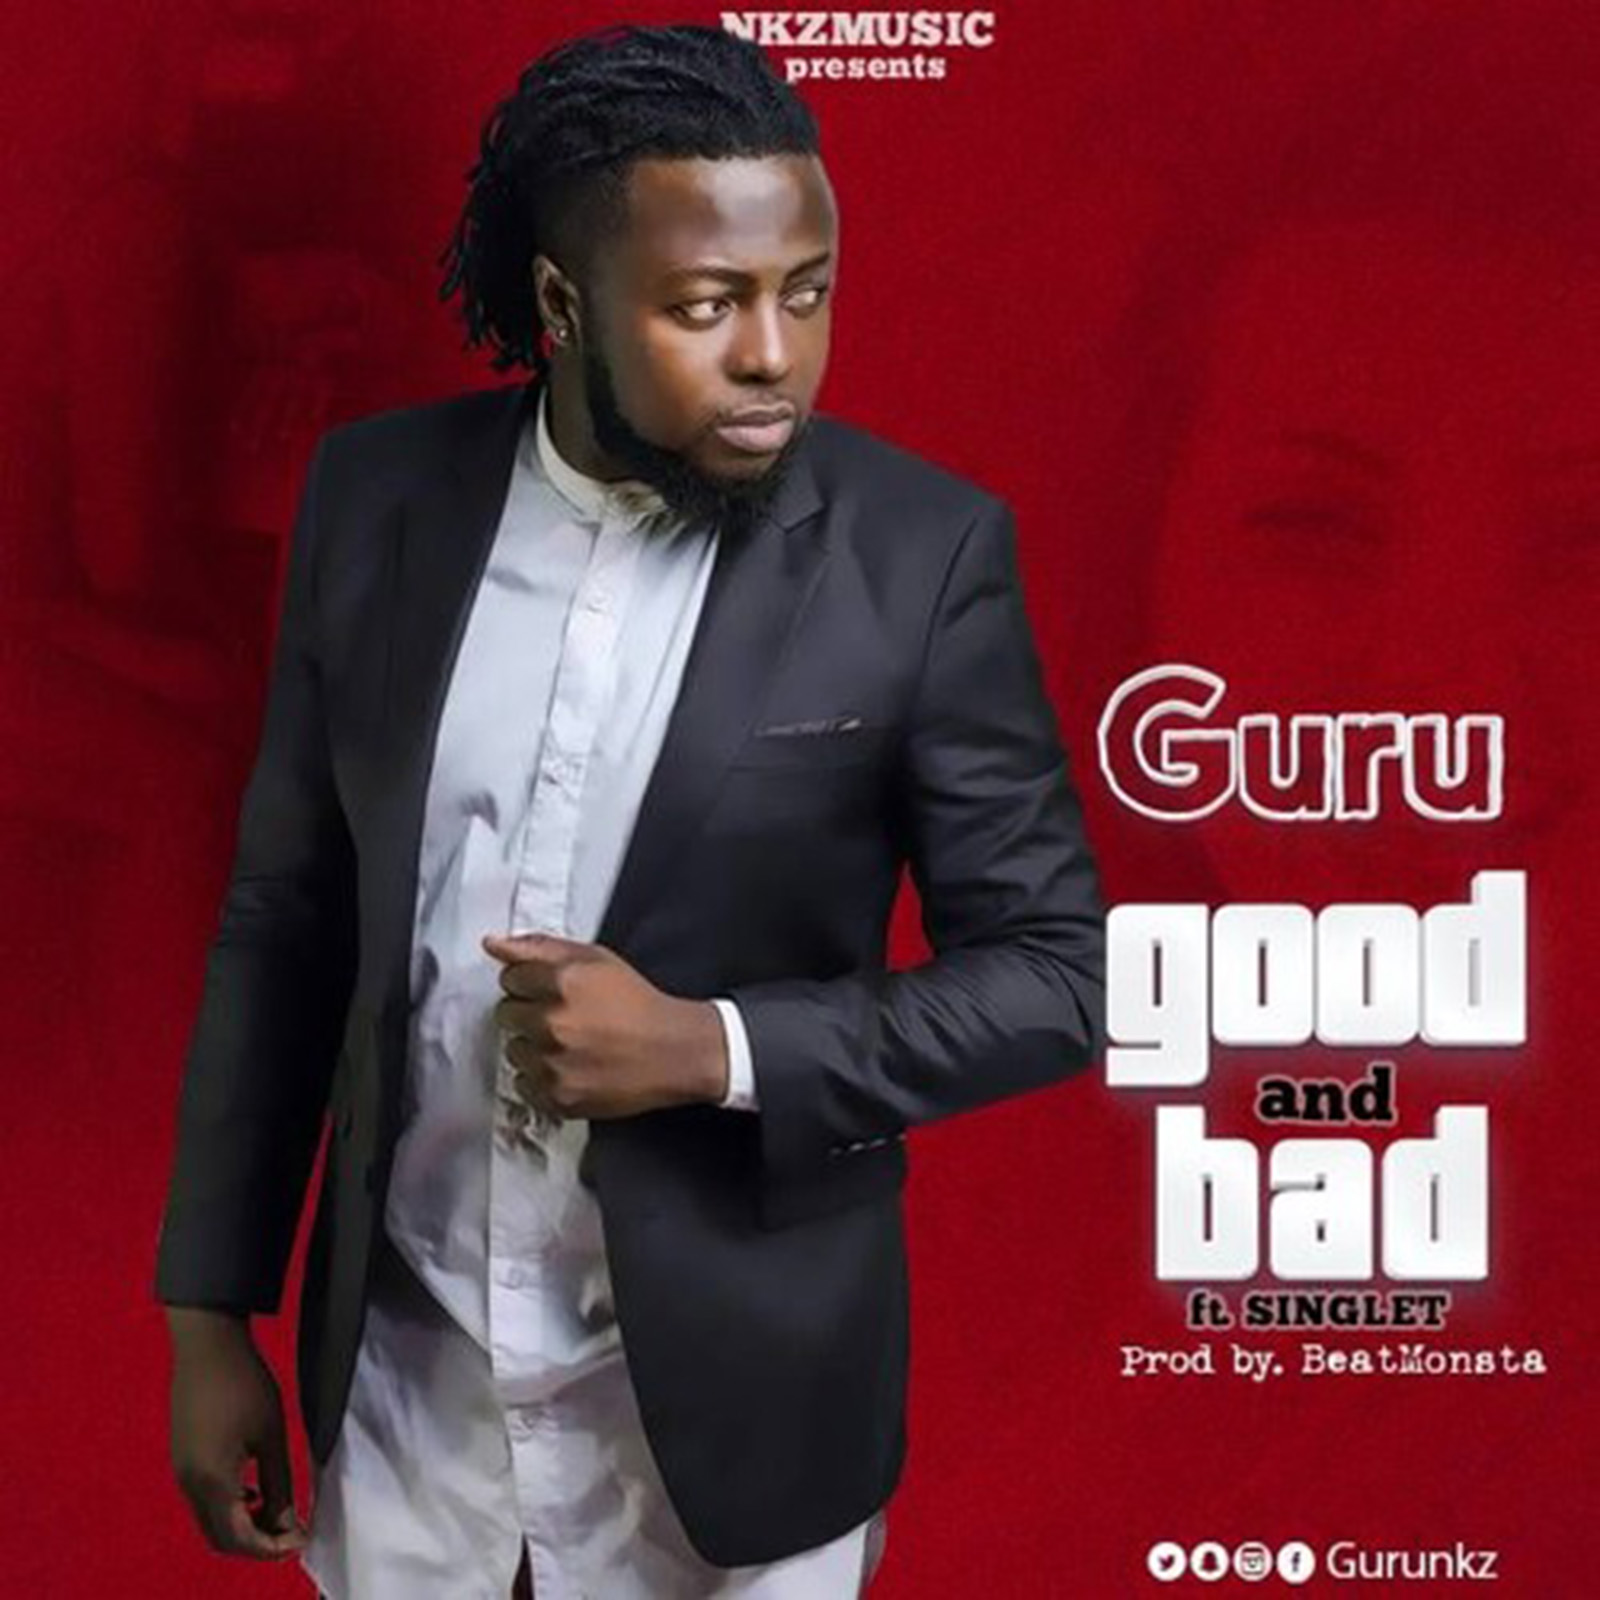 Good And Bad by Guru feat. Singlet